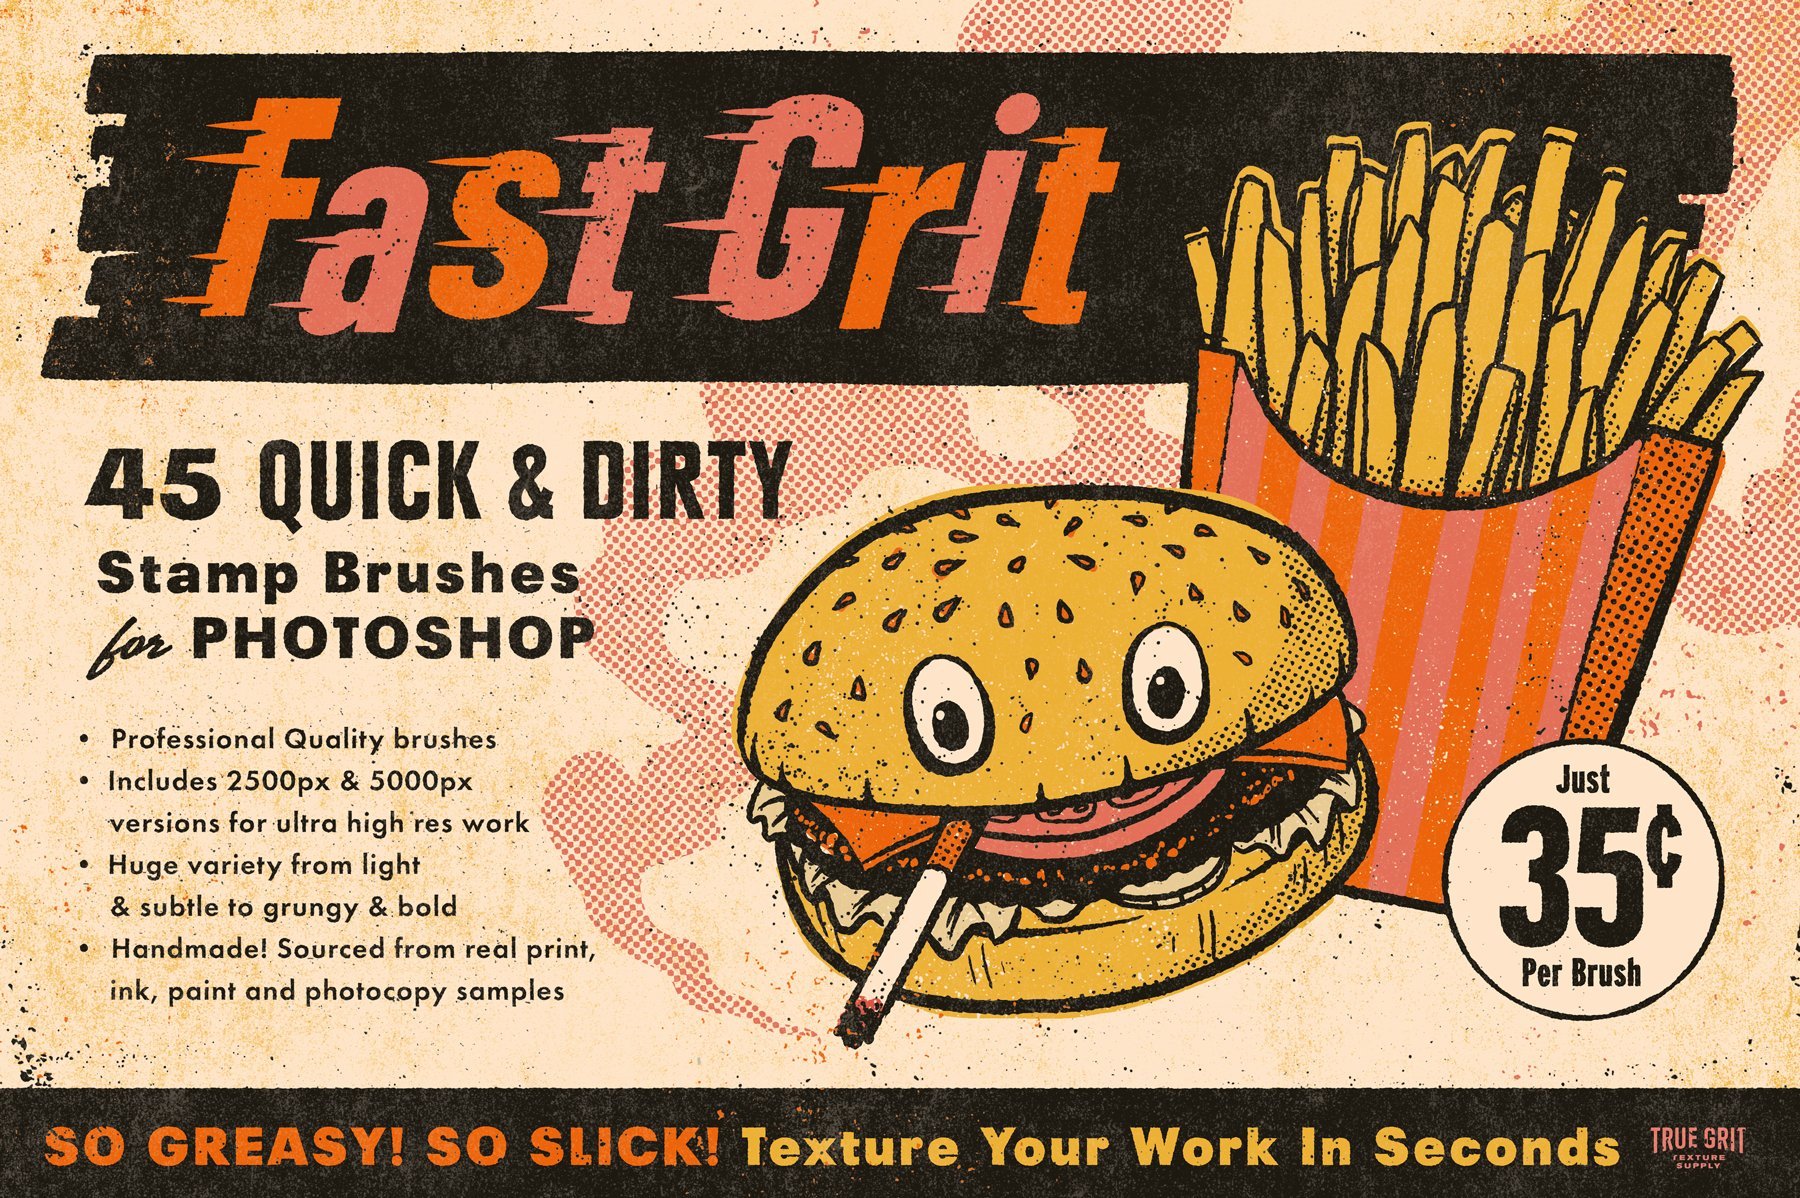 Fast Grit Brushes for Photoshop